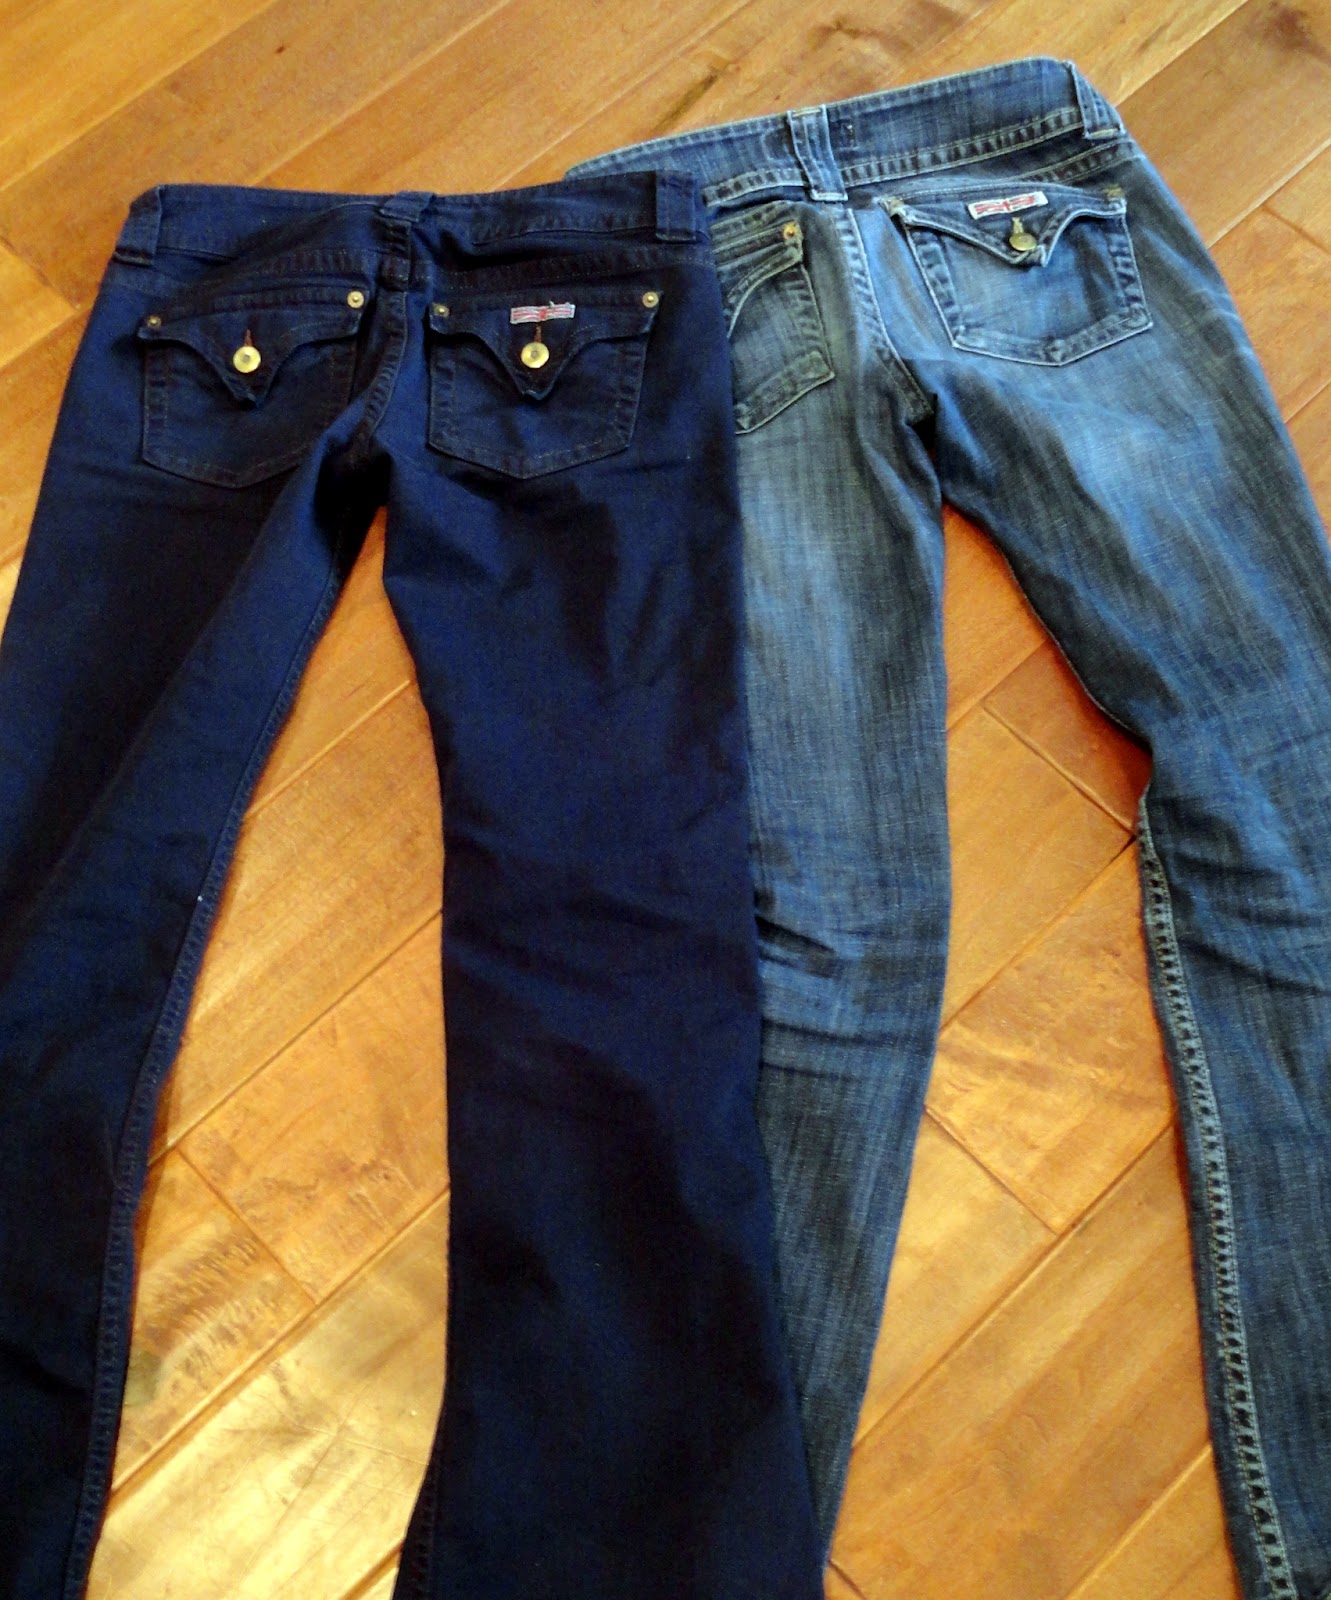 Dying Jeans With Rit Dye, Before and After. How To In Comments